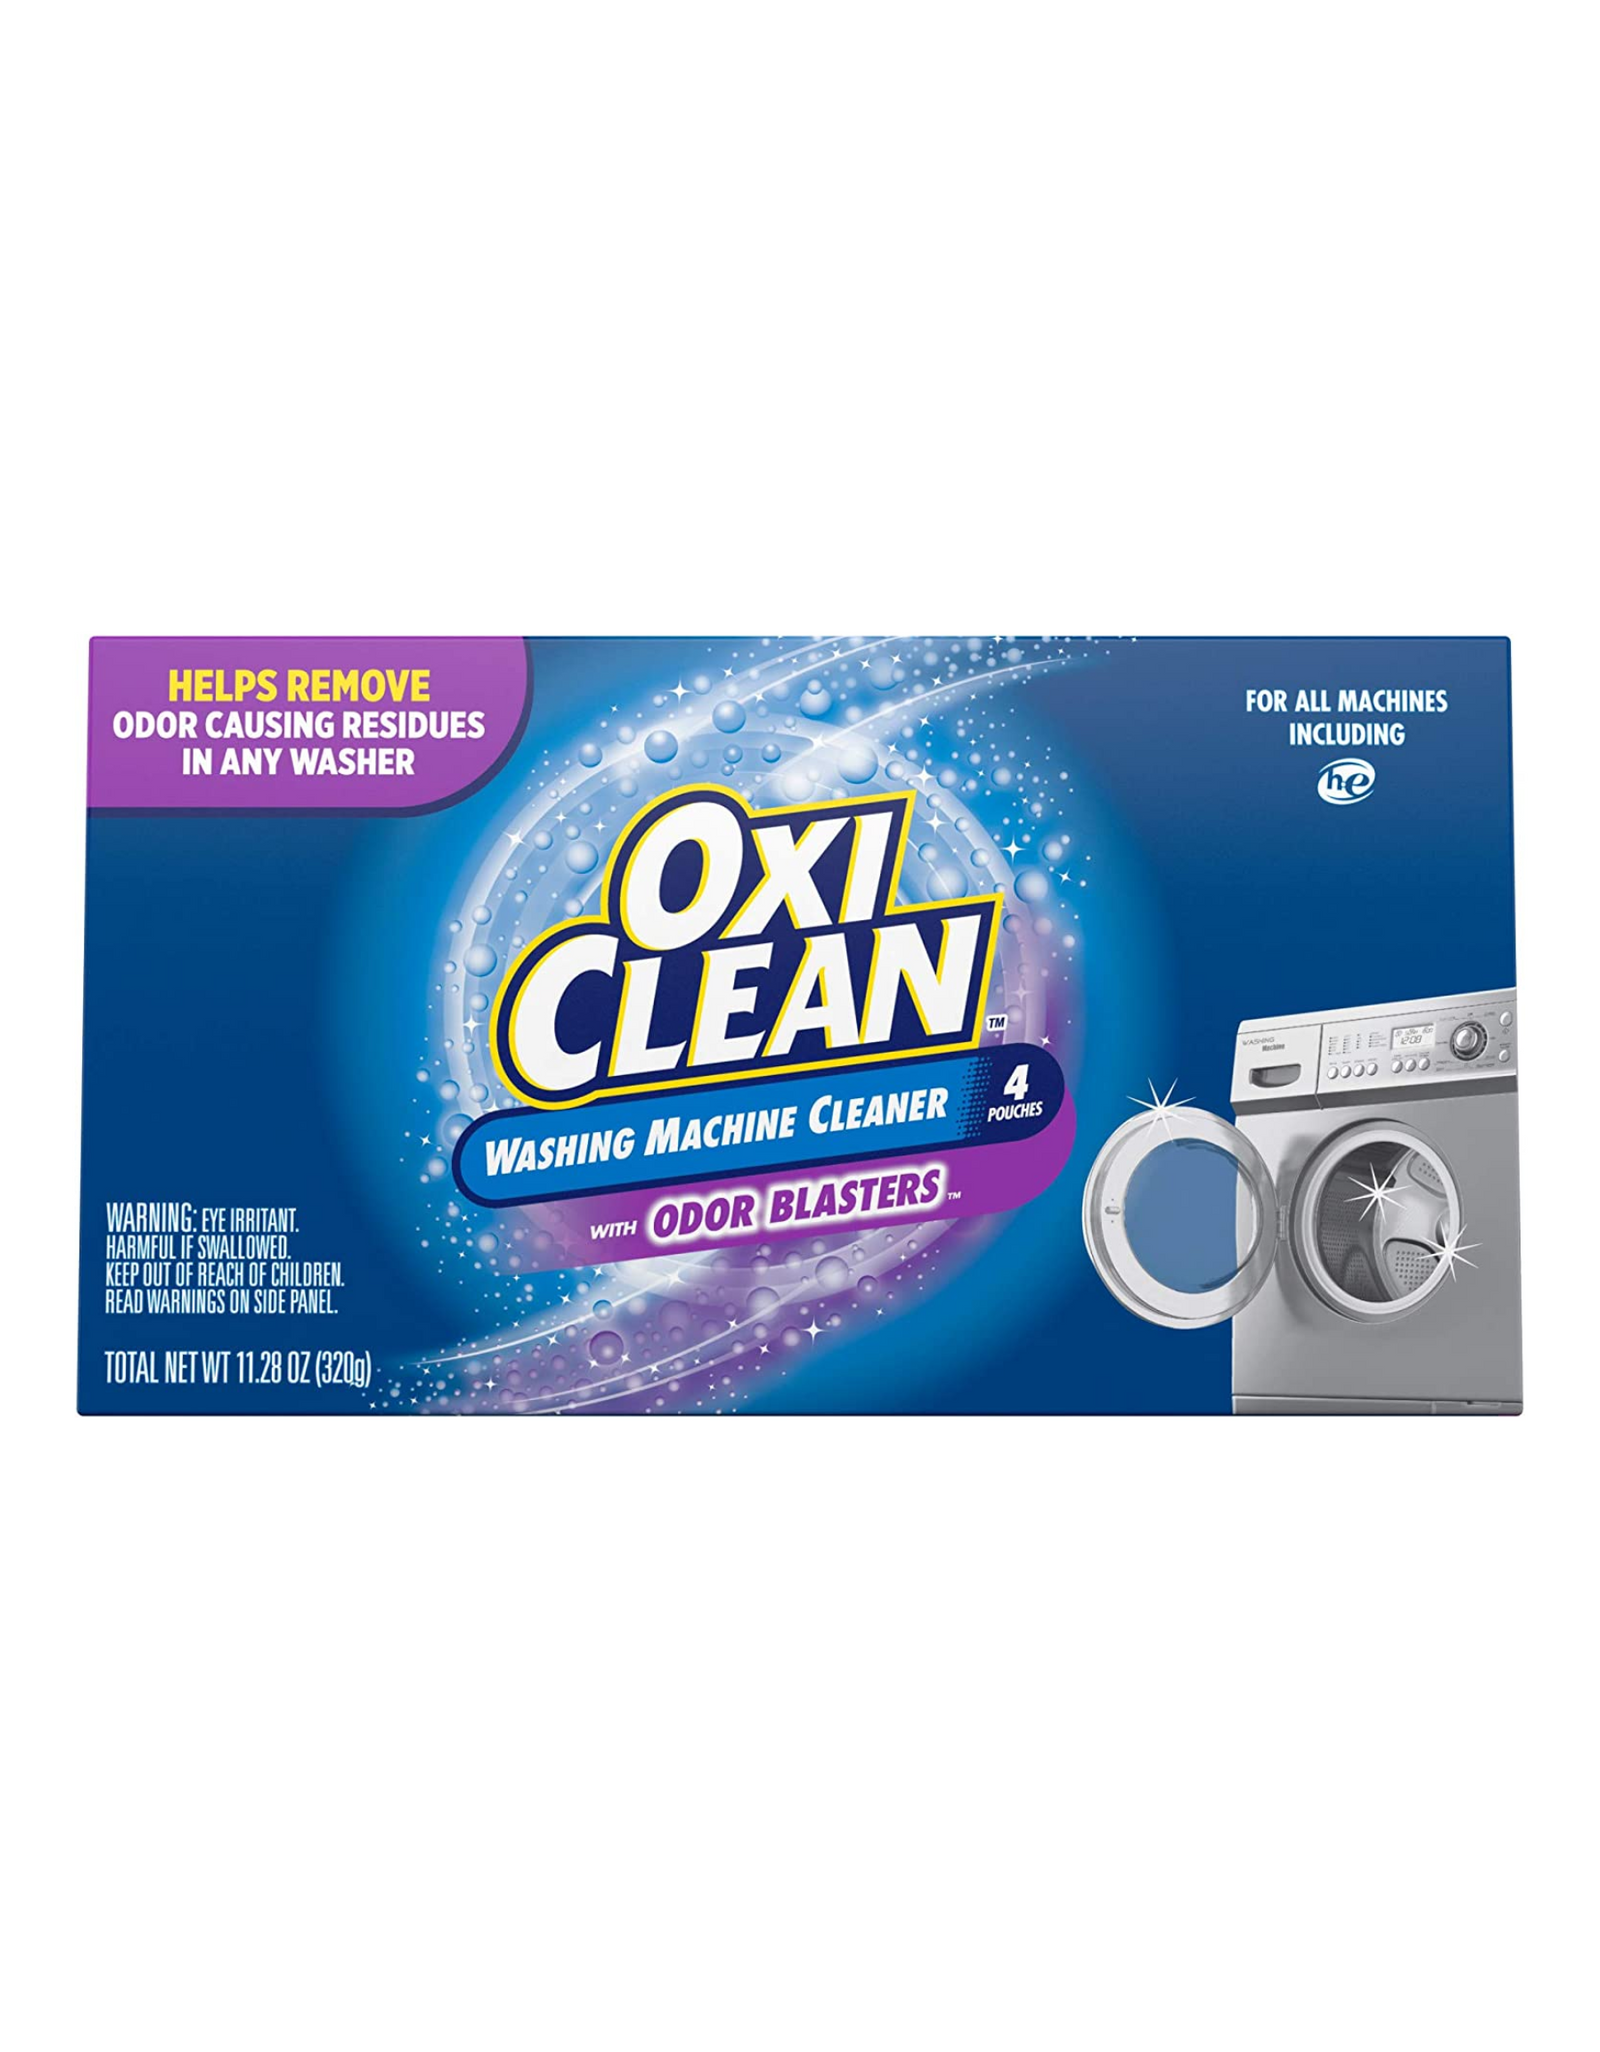 OxiClean Washing Machine Cleaner with, ODOR BLASTERS, Helps Remove Odor Causing Residues In  Any Washers, 4 Ct